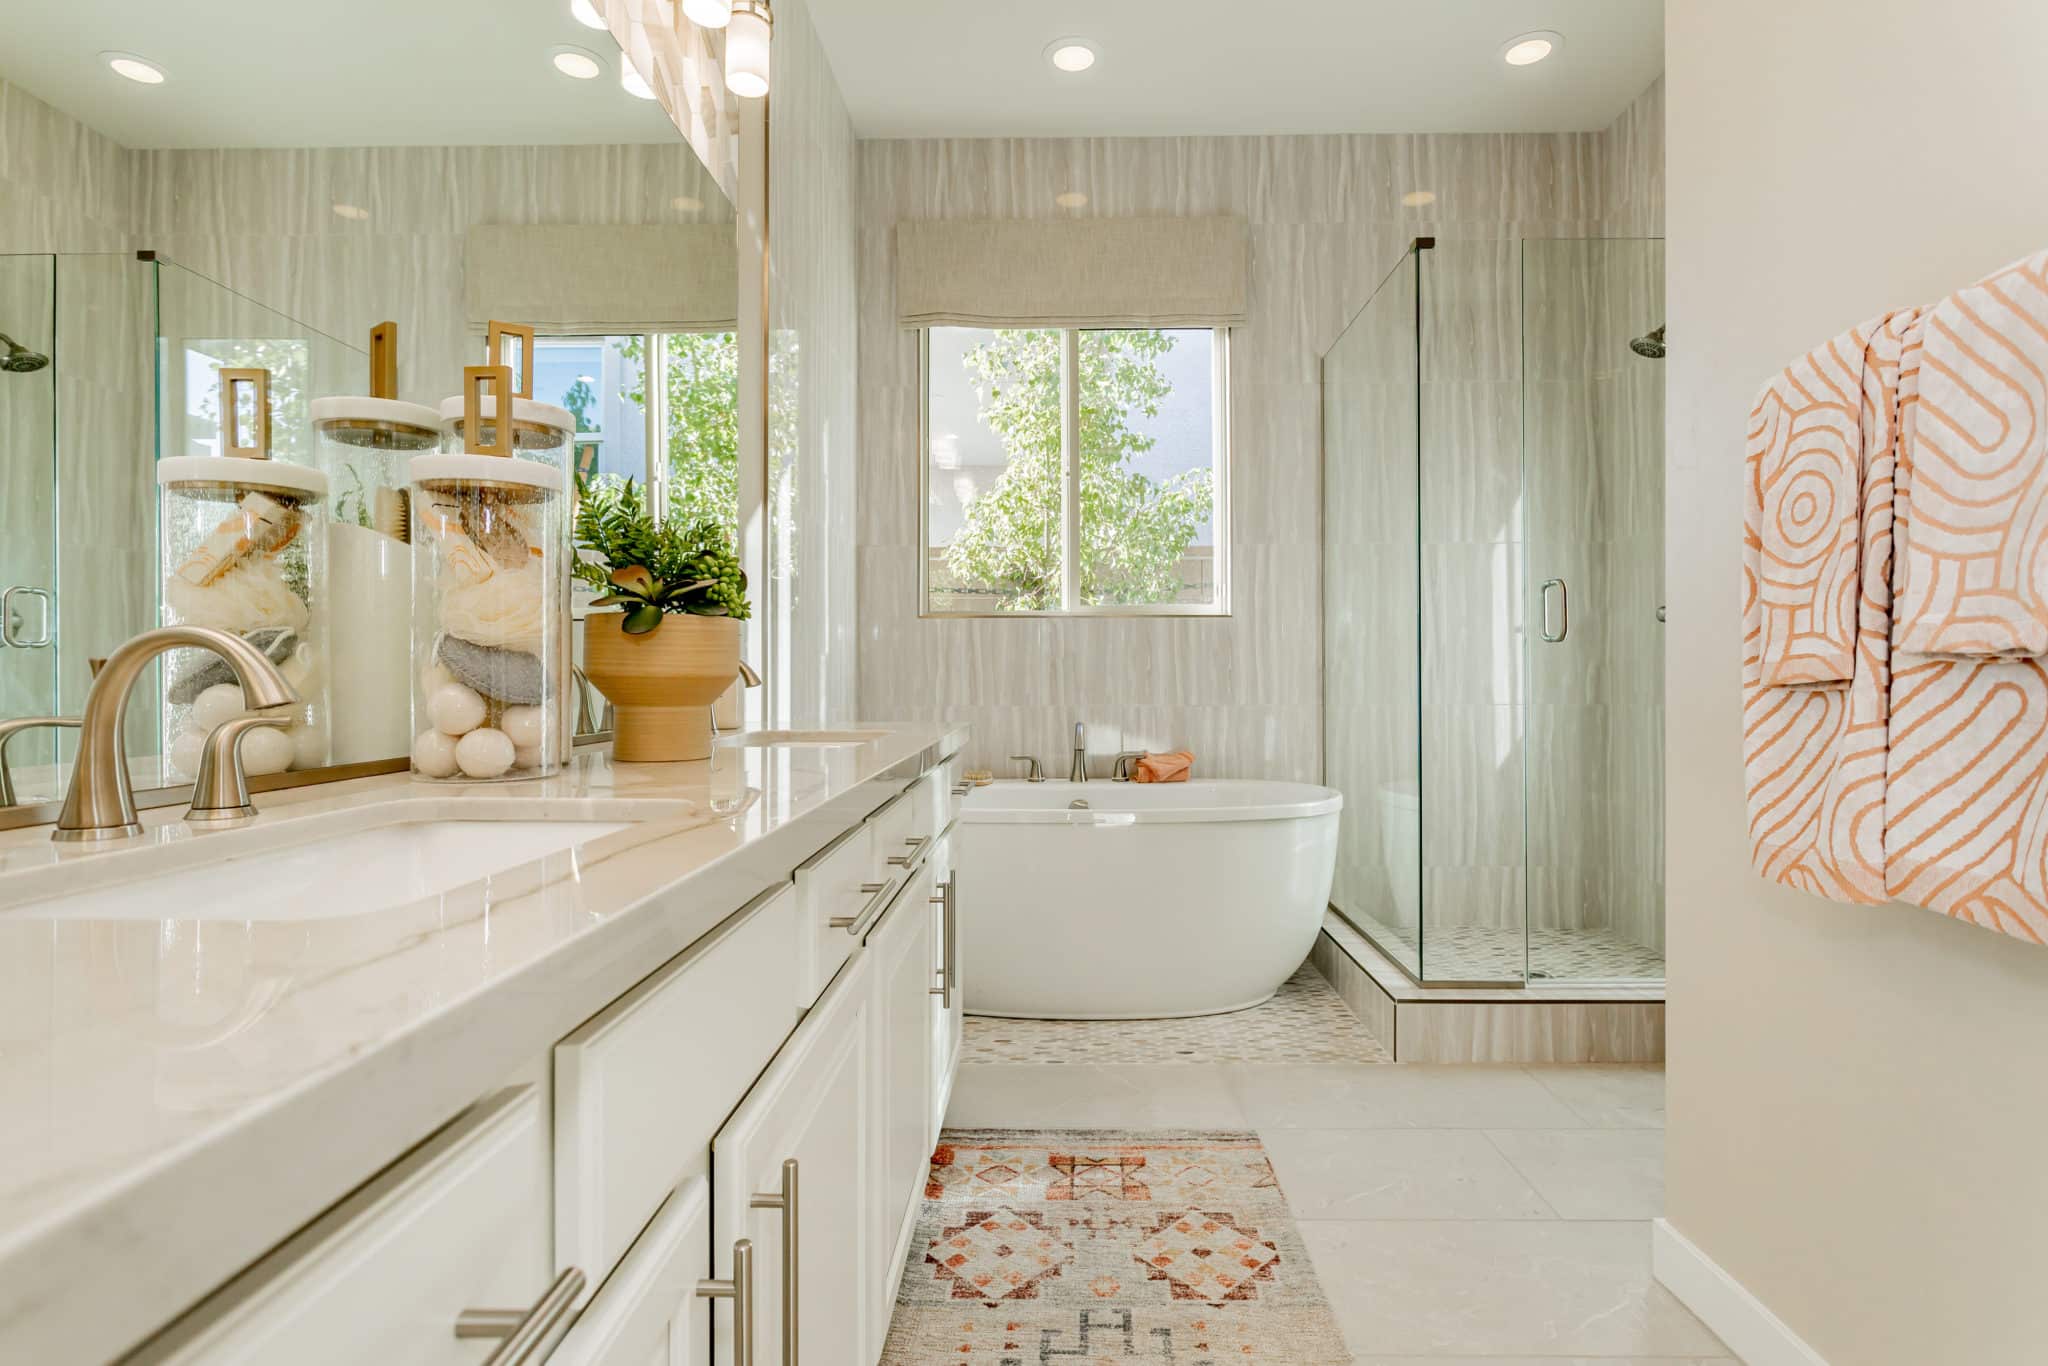 Primary Bathroom of Kestrel Plan 3 at Falcon Crest by Woodside